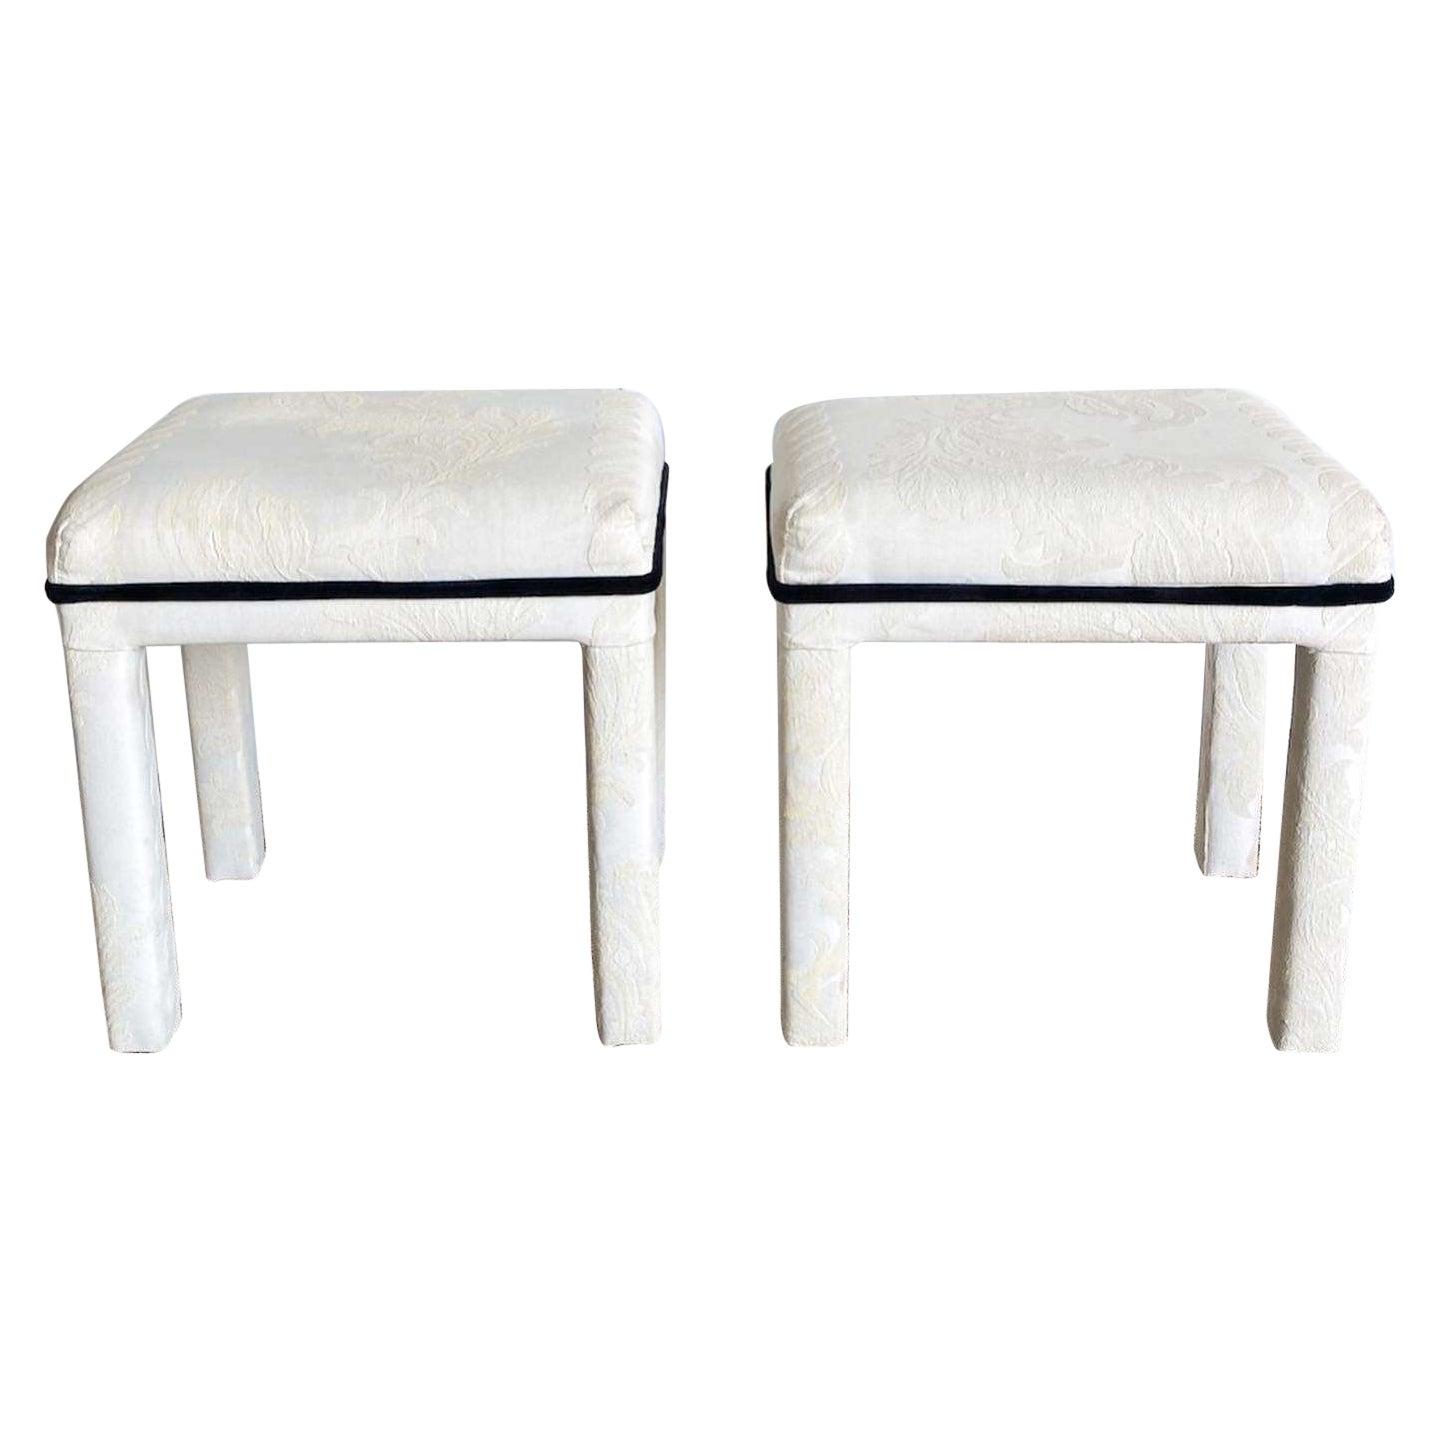 Postmodern Off White Low Parsons Stools - a Pair For Sale